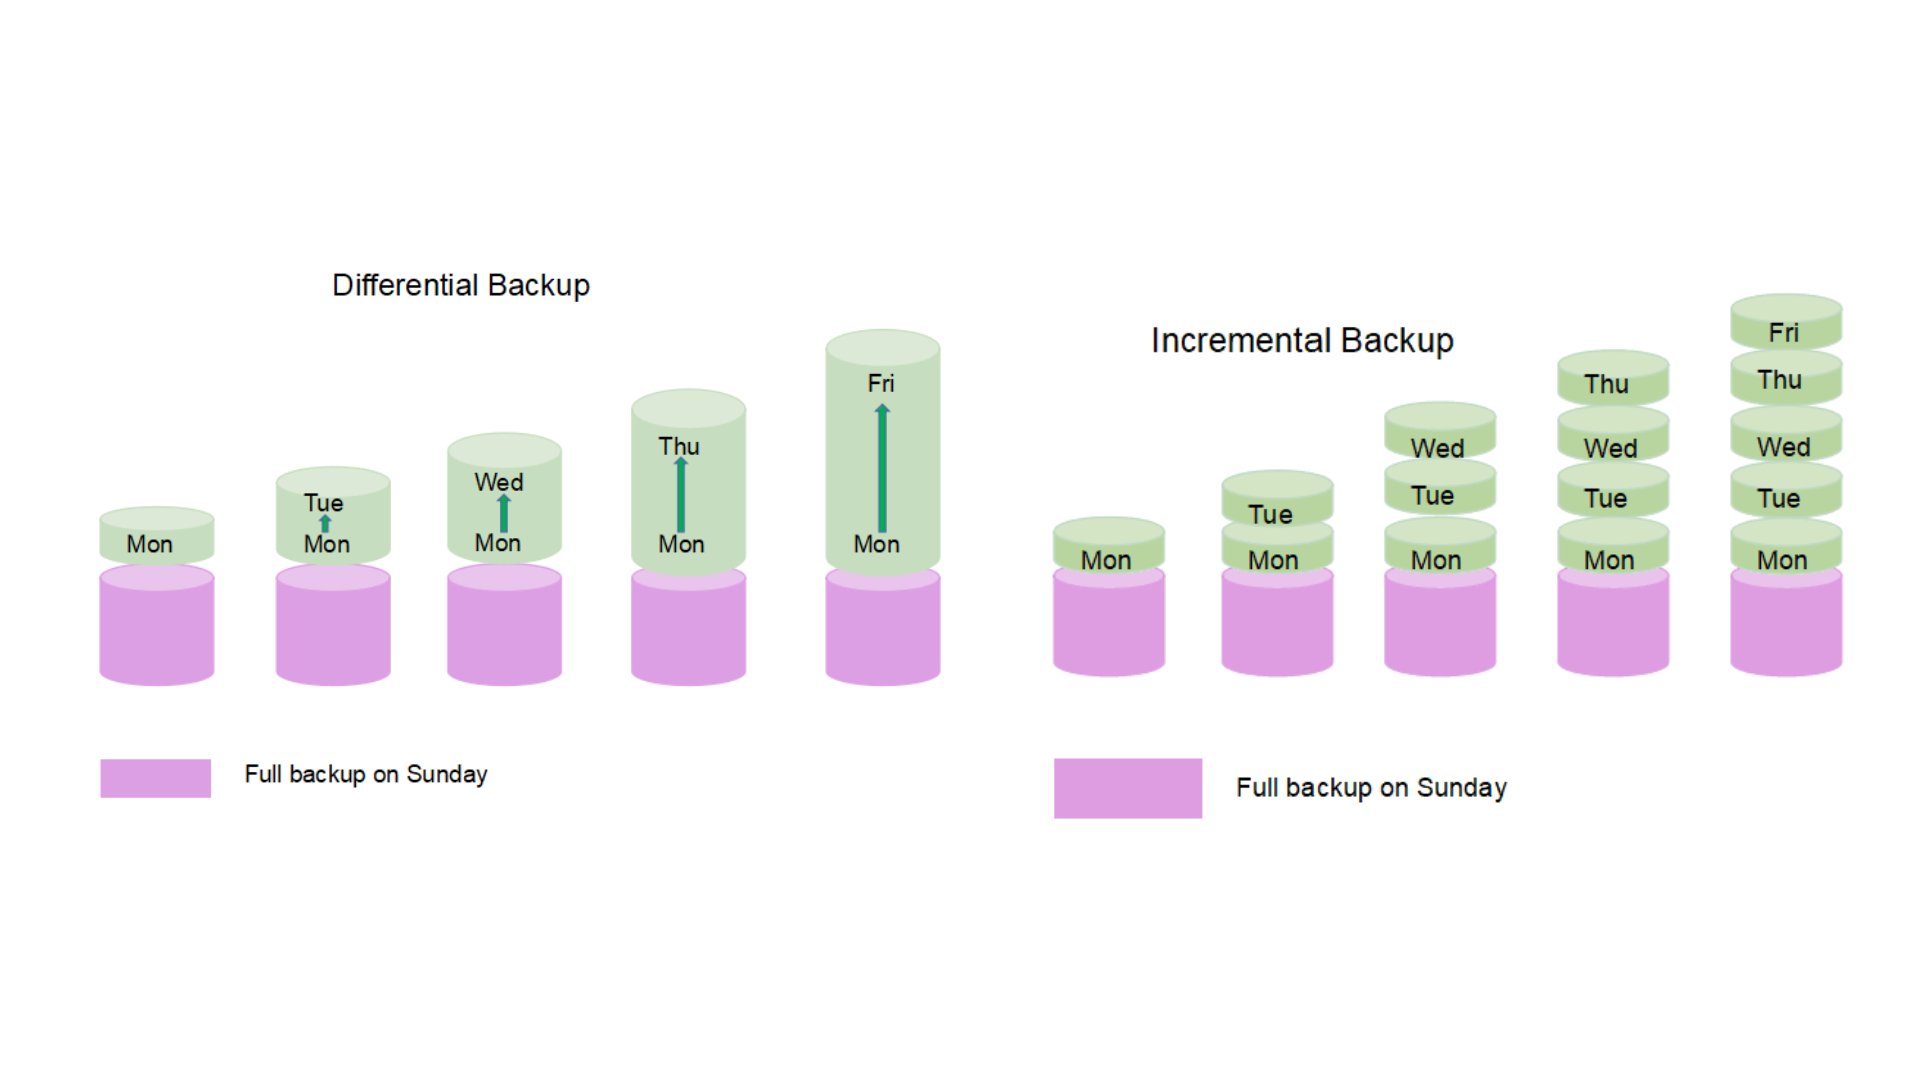 Are incremental backups faster?